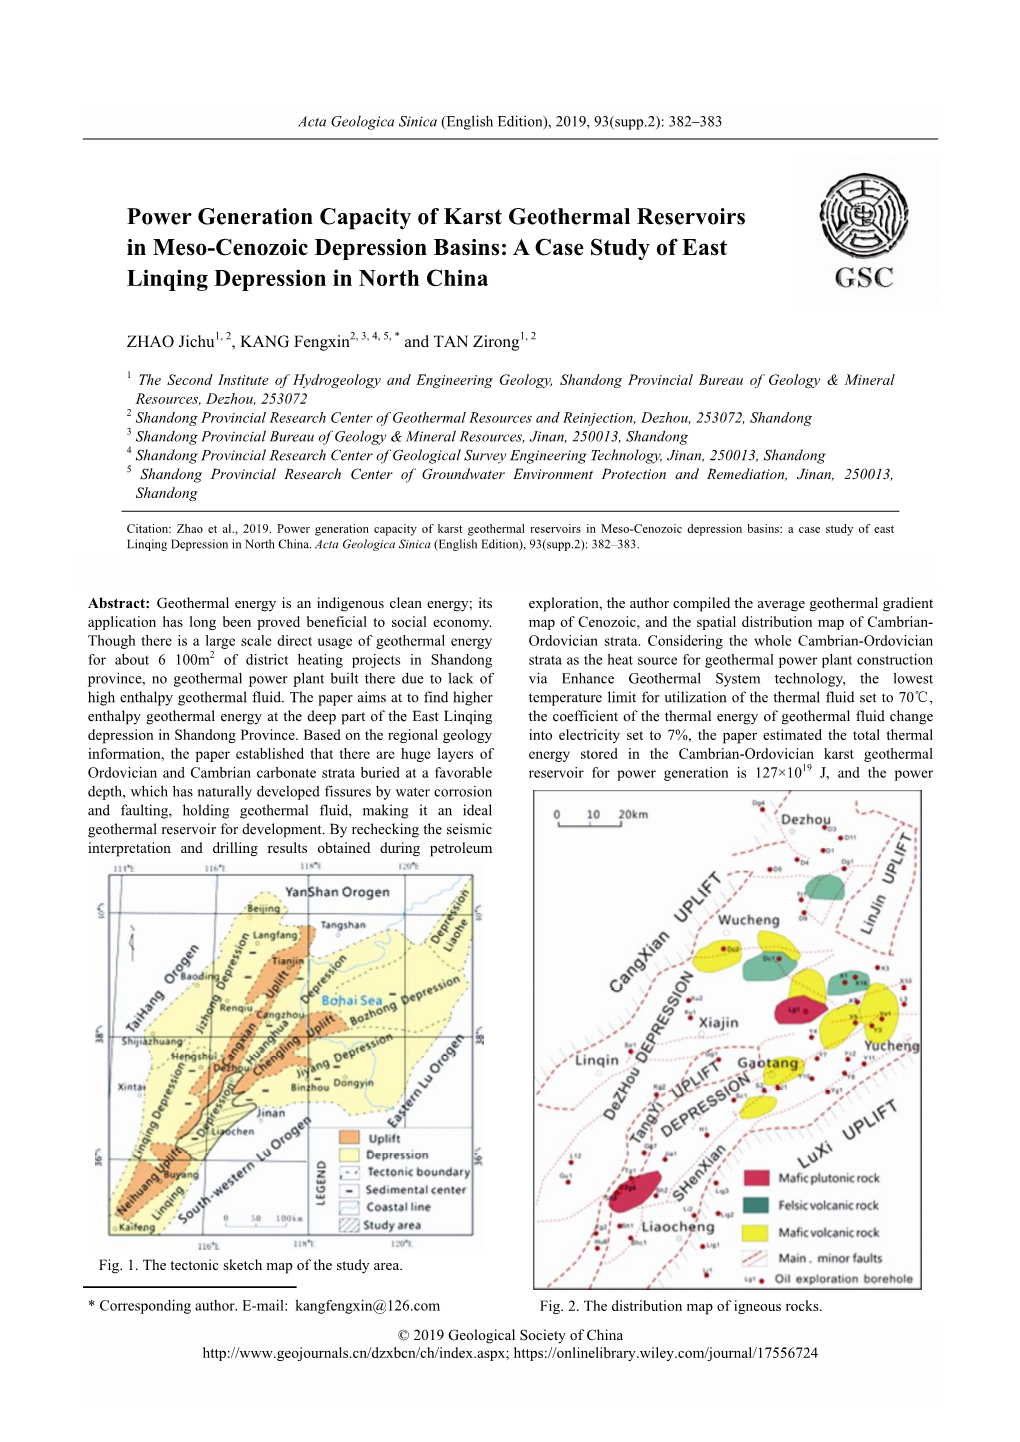 Power Generation Capacity of Karst Geothermal Reservoirs in Meso-Cenozoic Depression Basins: a Case Study of East Linqing Depression in North China